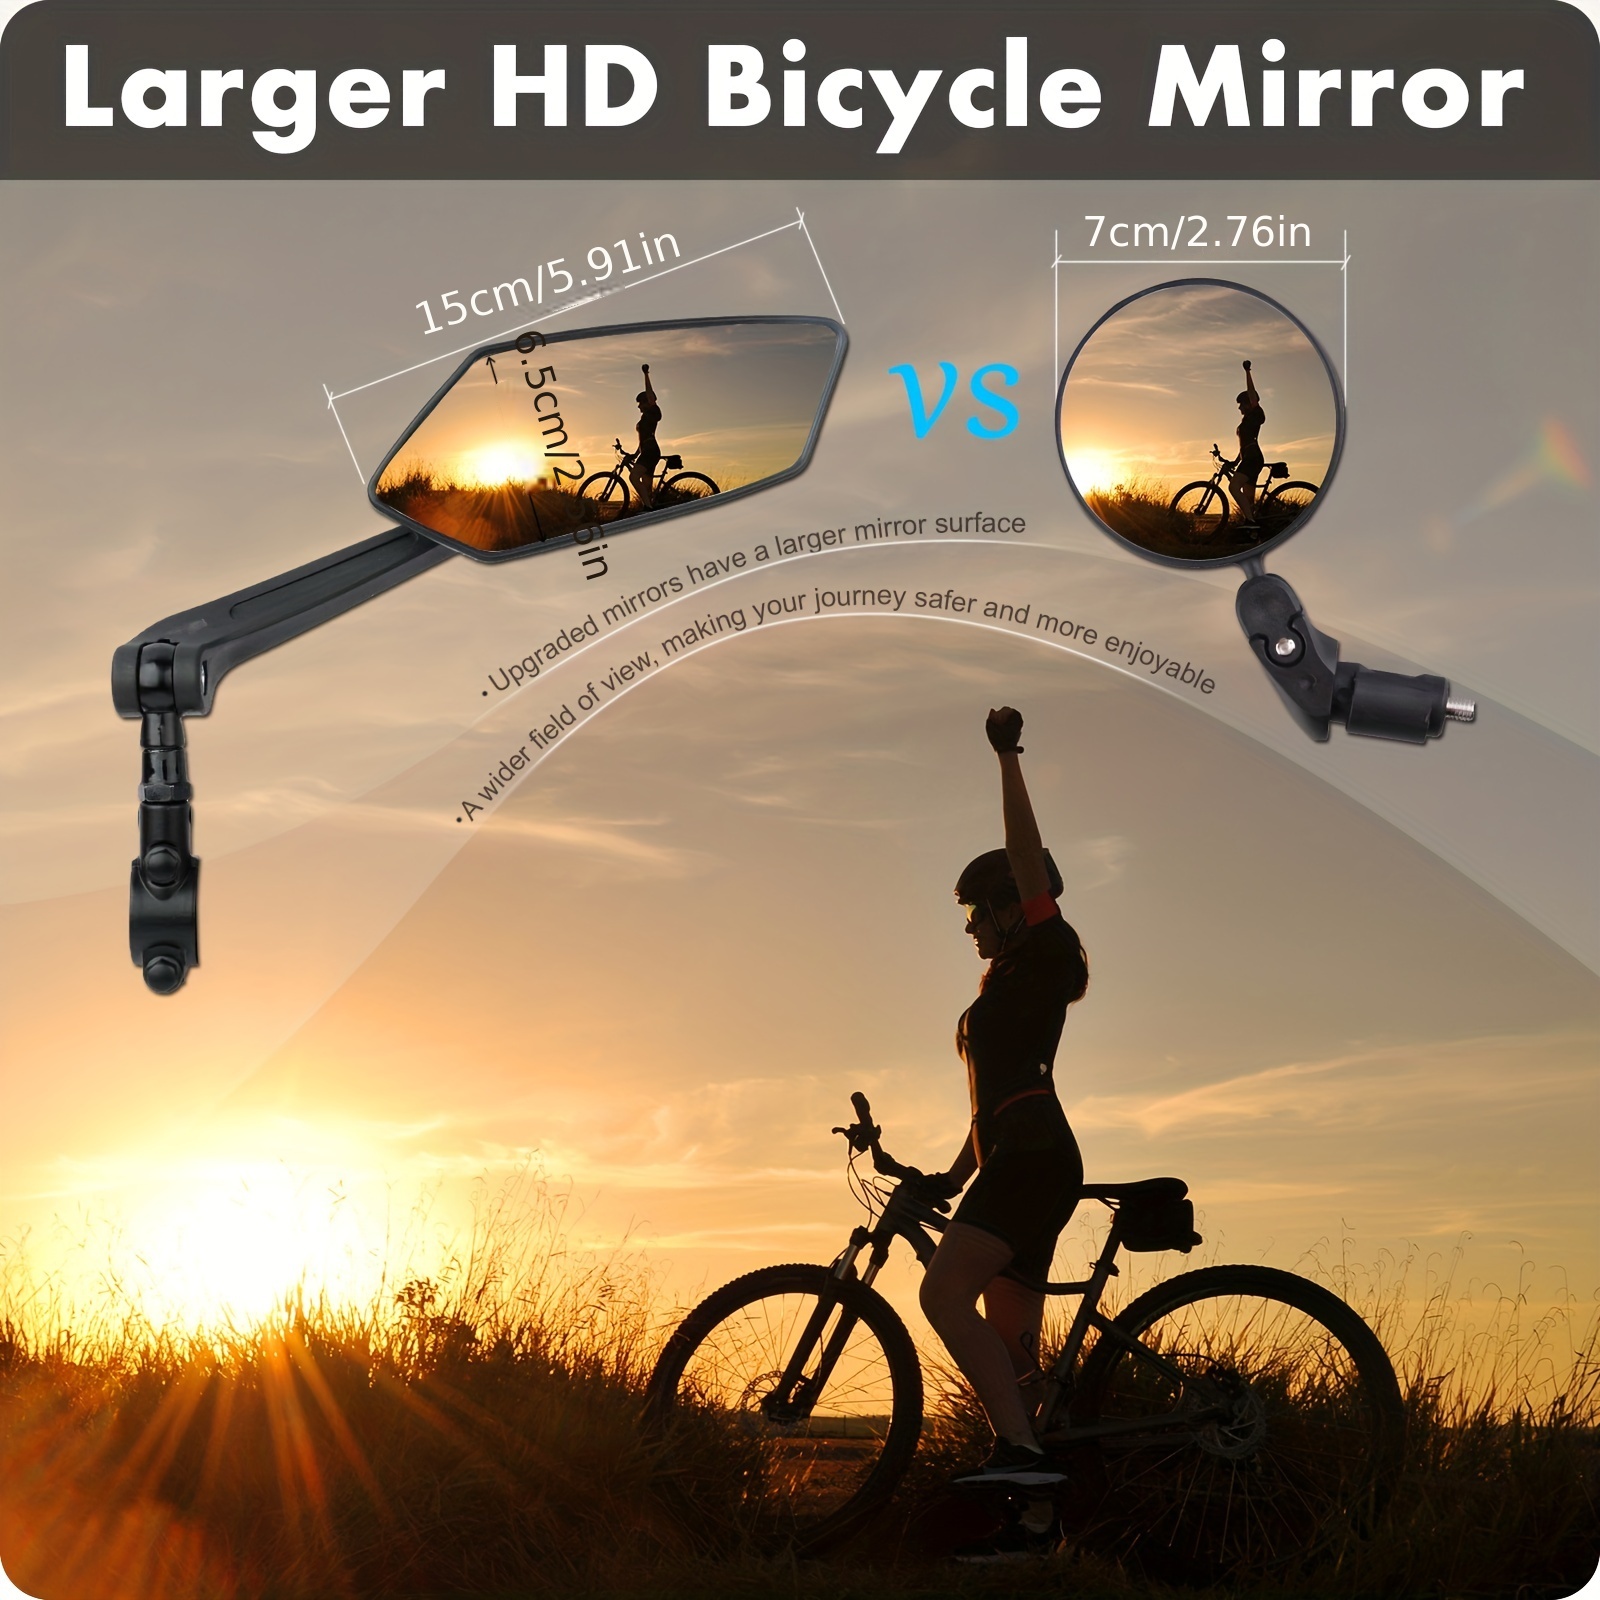 2pcs Bike Handlebar Mirrors For Bicycle Ebike Scooter Snowbike Adjuatable Wide Angle Rear View And 360° Rotatable Safety Galss Design